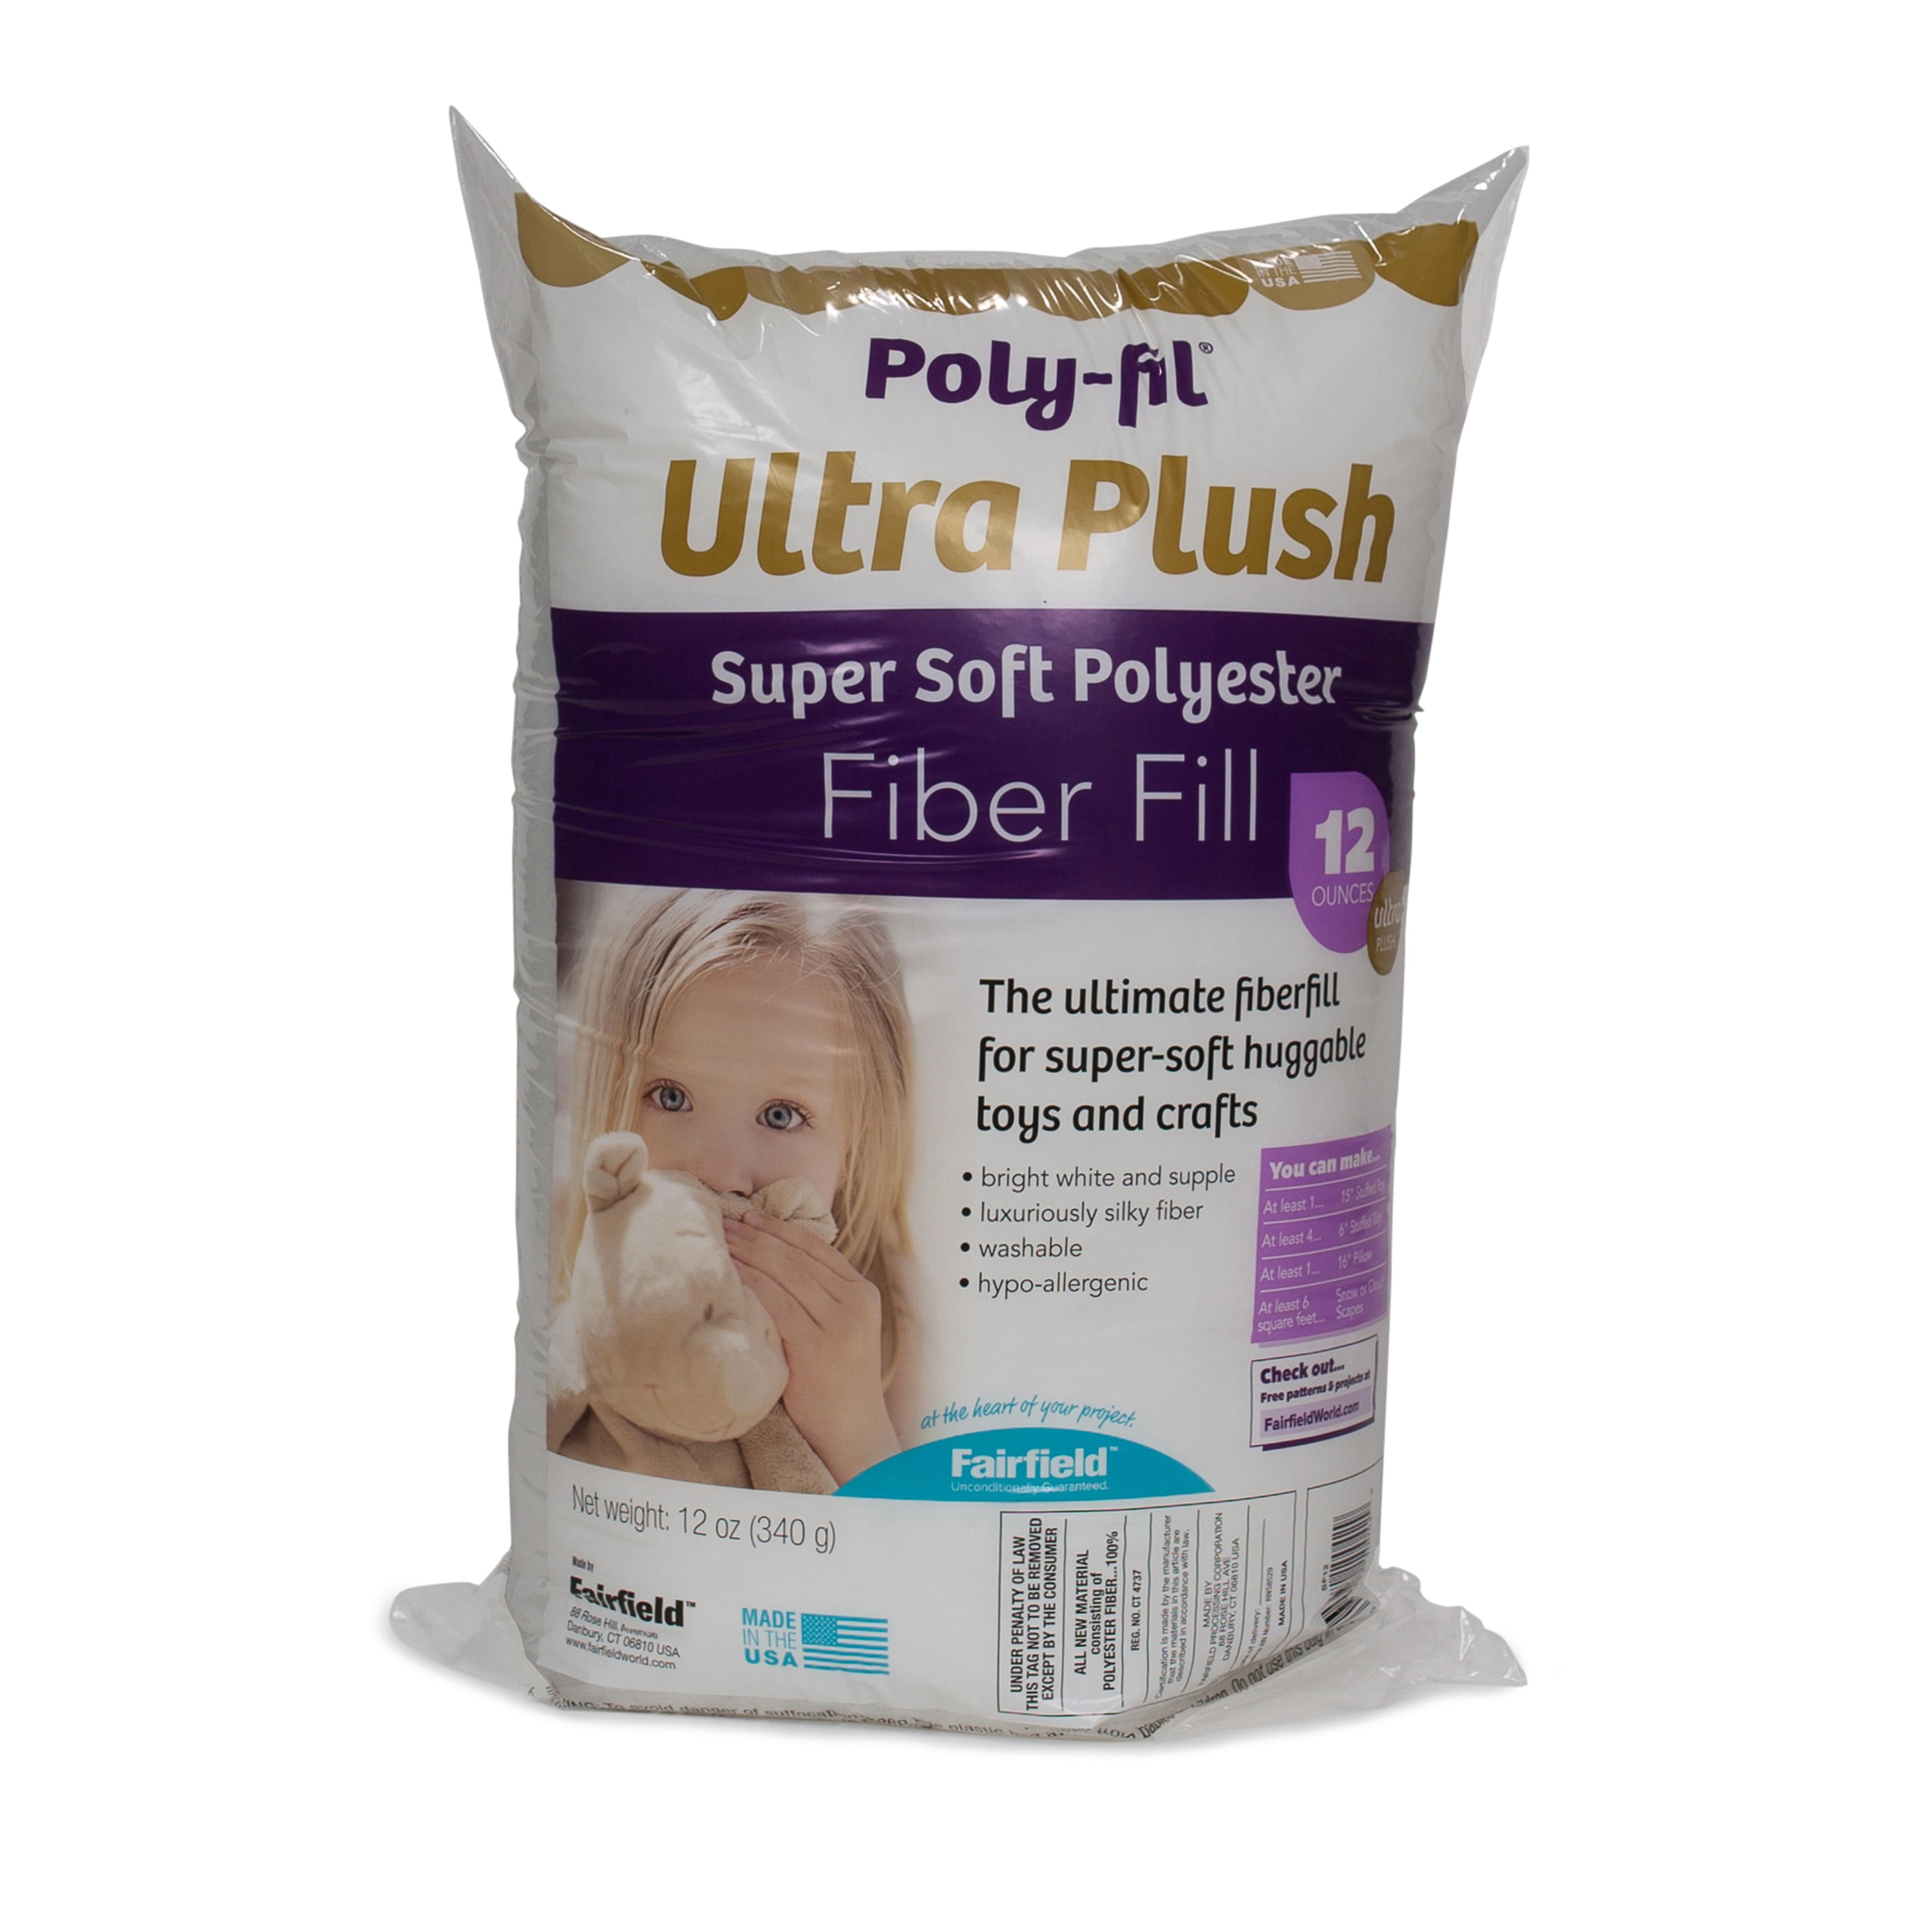 Poly-Fil Premium Polyester Fiberfill for Crafts, 12 oz.